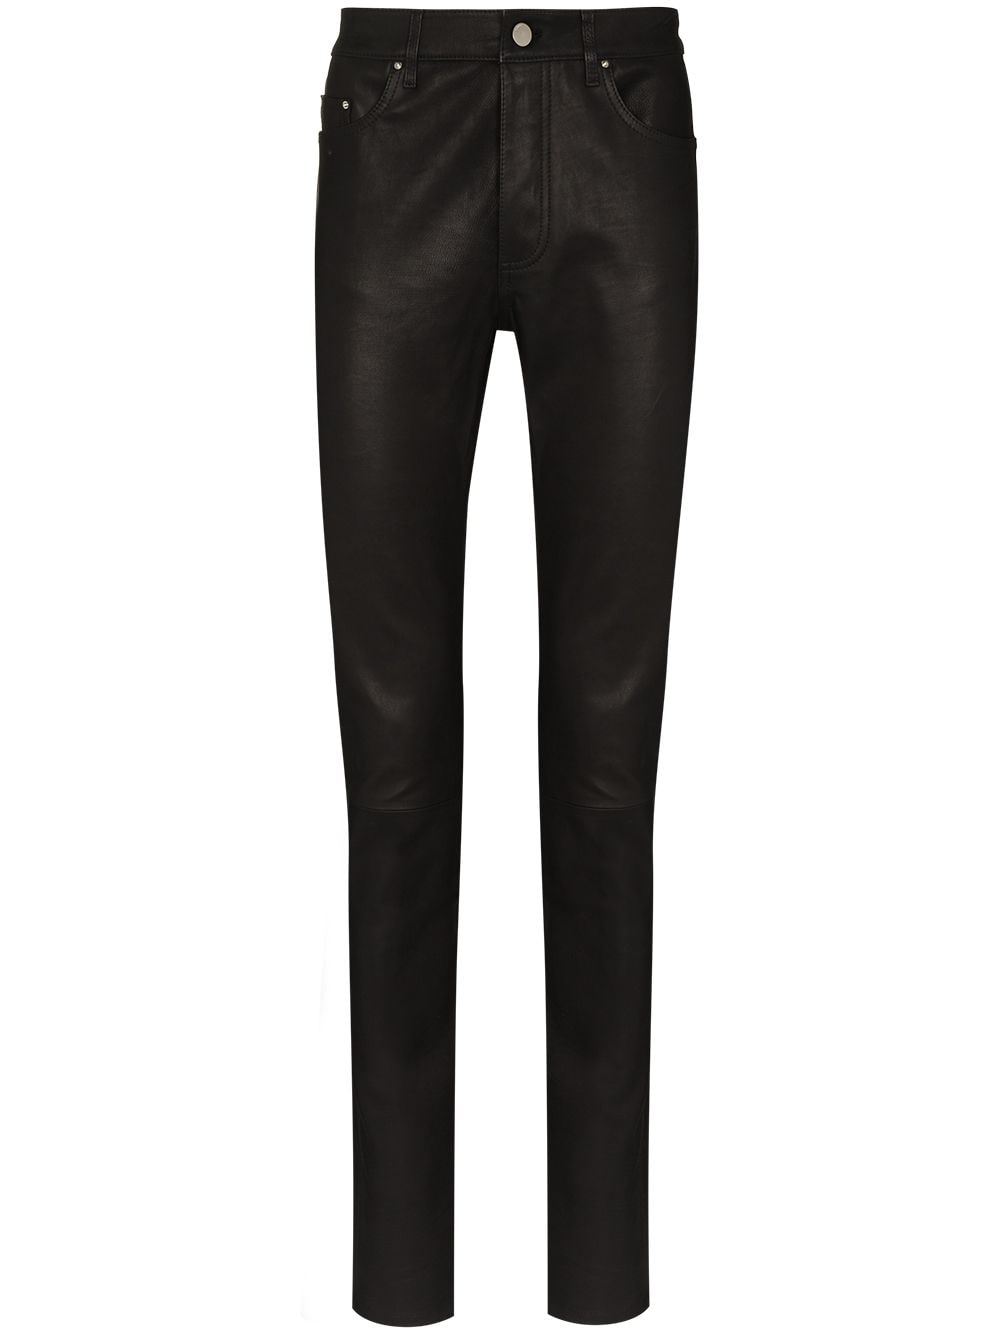 Vegan Proper Citizen - Skinny Fit Faux Leather Pants | Straight To Hell  Apparel